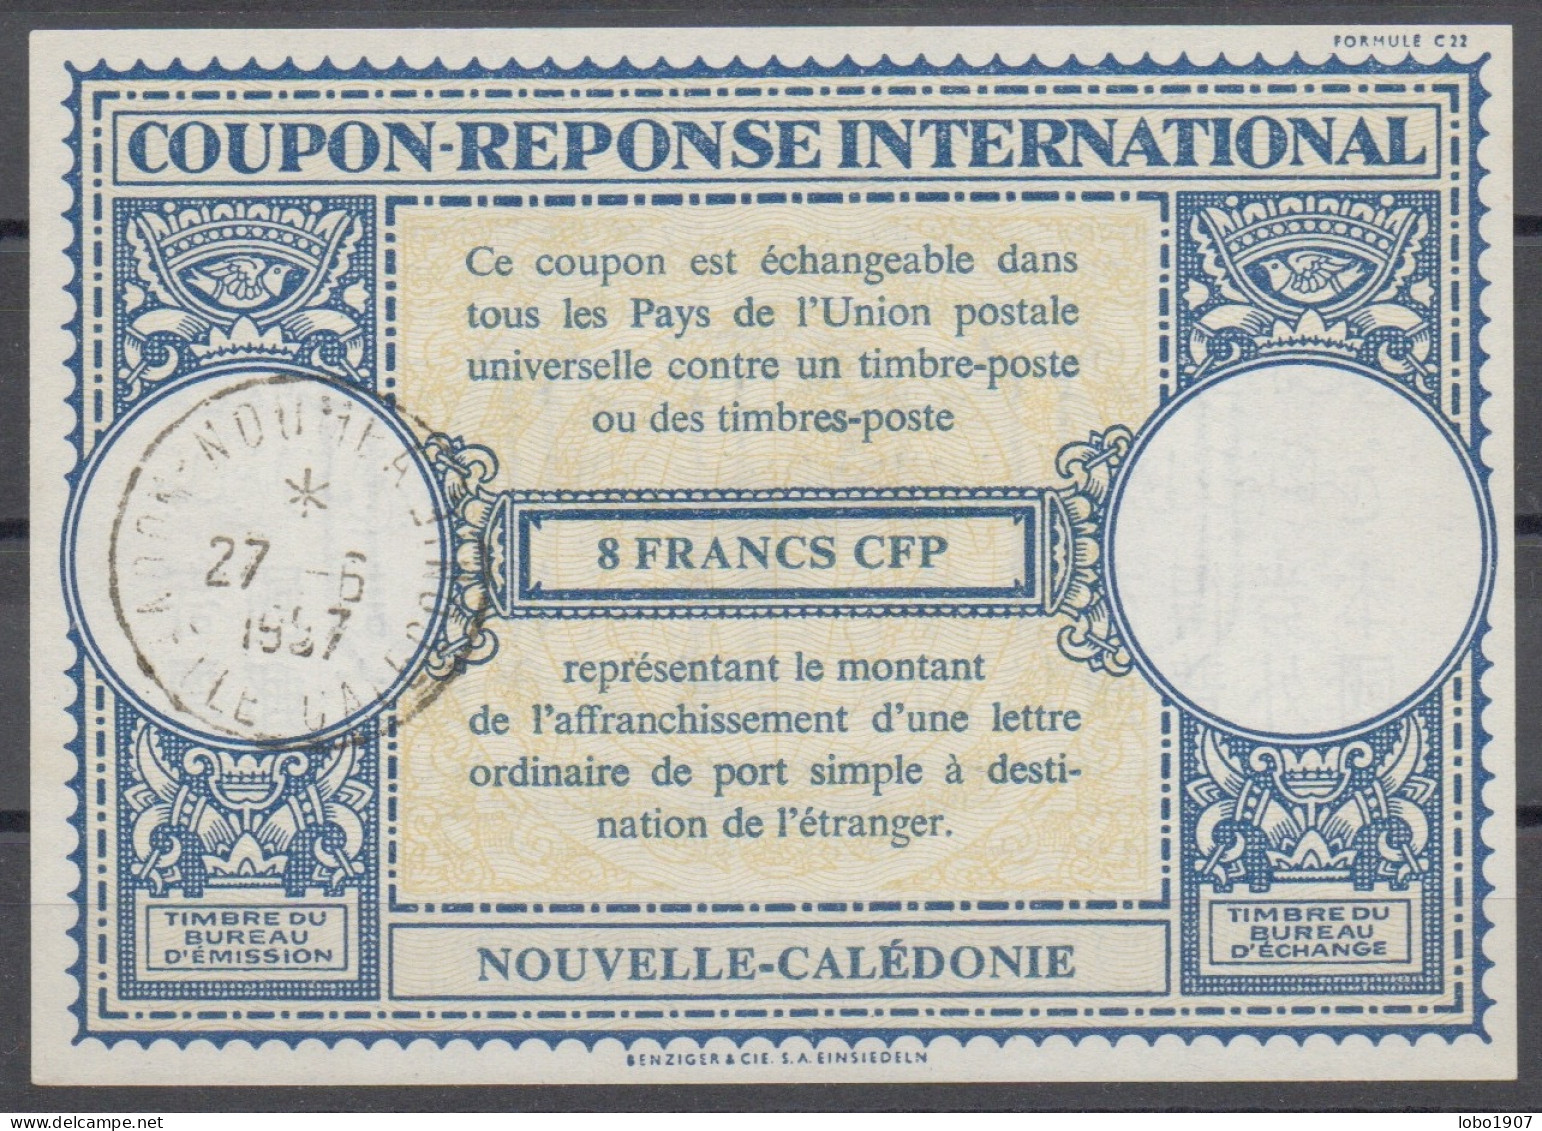 NOUVELLE CALEDONIE  Lo16n  8 FRANCS CFP International Reply Coupon Reponse Antwortschein IRC IAS NOUMEA 27.06.57 Pdv! - Postal Stationery